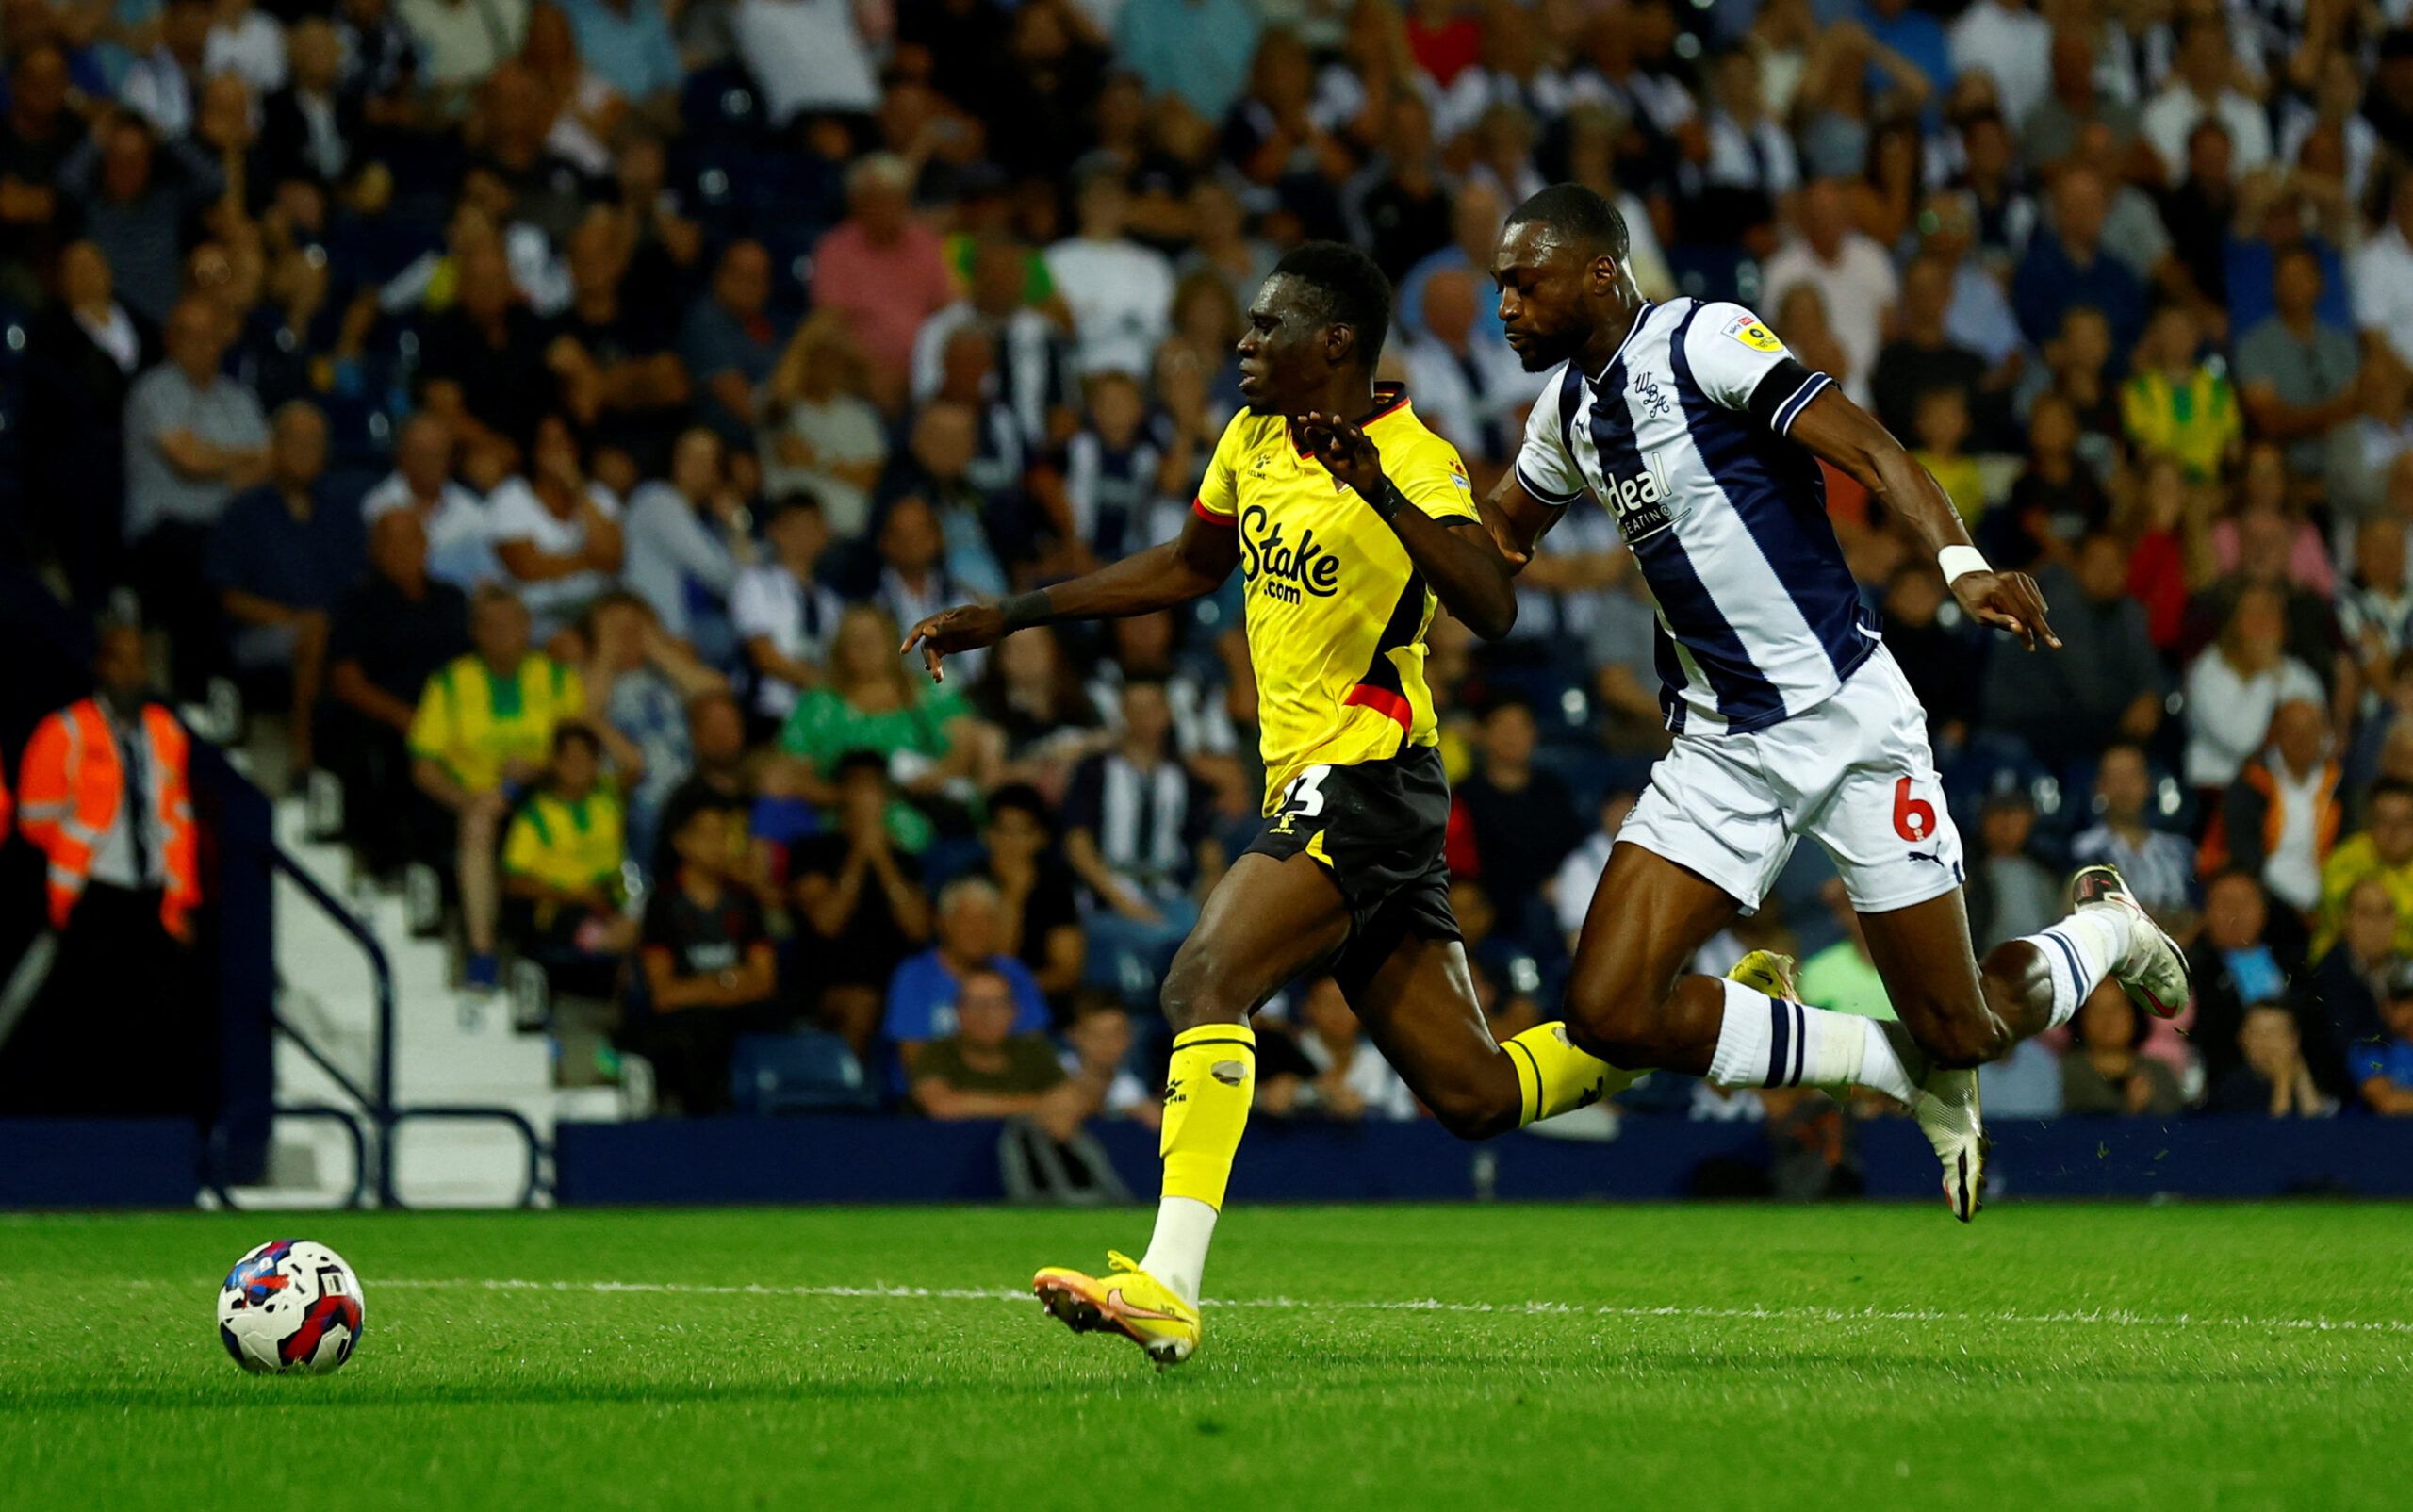 Soccer Football - Championship - West Bromwich Albion v Watford - The Hawthorns, West Bromwich, Britain - August 8, 2022 Watford's Ismaila Sarr is fouled by West Bromwich Albion's Semi Ajayi and a penalty is awarded Action Images/Andrew Boyers  EDITORIAL USE ONLY. No use with unauthorized audio, video, data, fixture lists, club/league logos or 